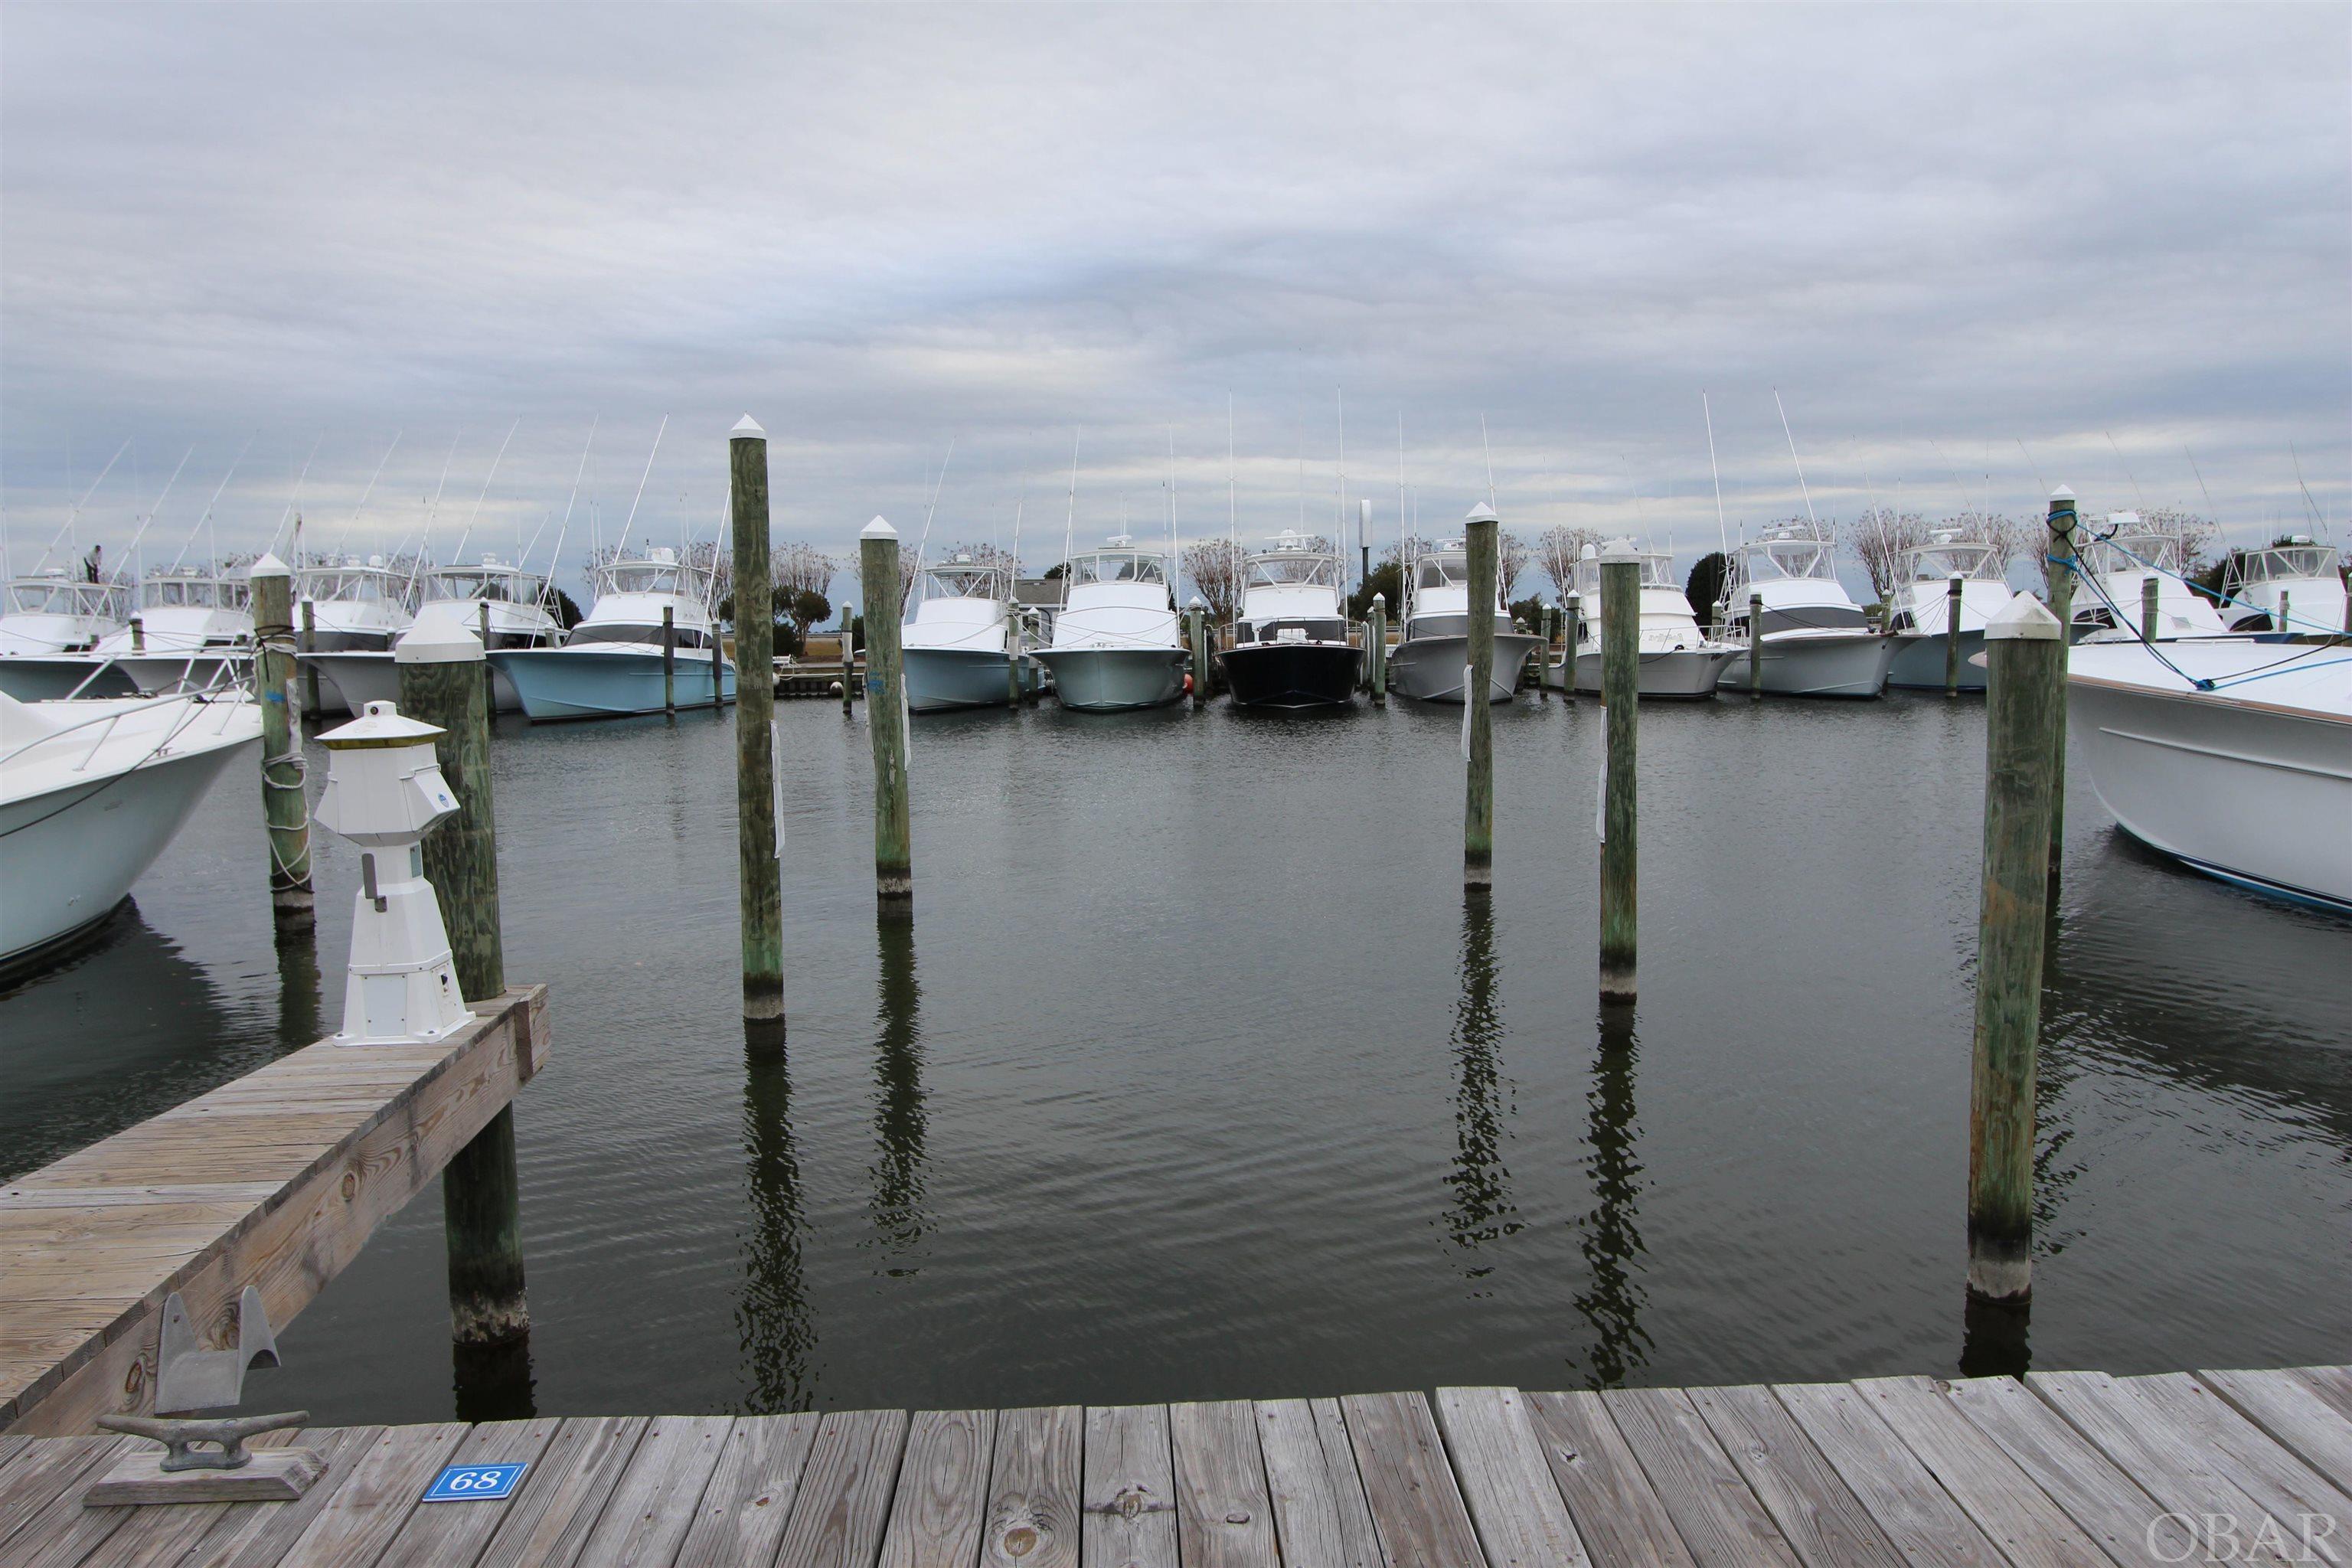 55' Deeded Slip with a 5' spring line allowance up to 60'. Approximately 18'6" wide. Opportunity to have a secure slip for your boat in the WORLD CLASS MARINA.  Adjacent to parking, the Tiki Bar, Ships Store, Bluewater Grill and Tournament Pavilion. Prime location!  Slip Owners may use the Pirates Cove Amenities, clubhouse/pool, lighted tennis courts, playground and fitness center for $5/per day, per/person. Water Included in Slip Owners Fee.